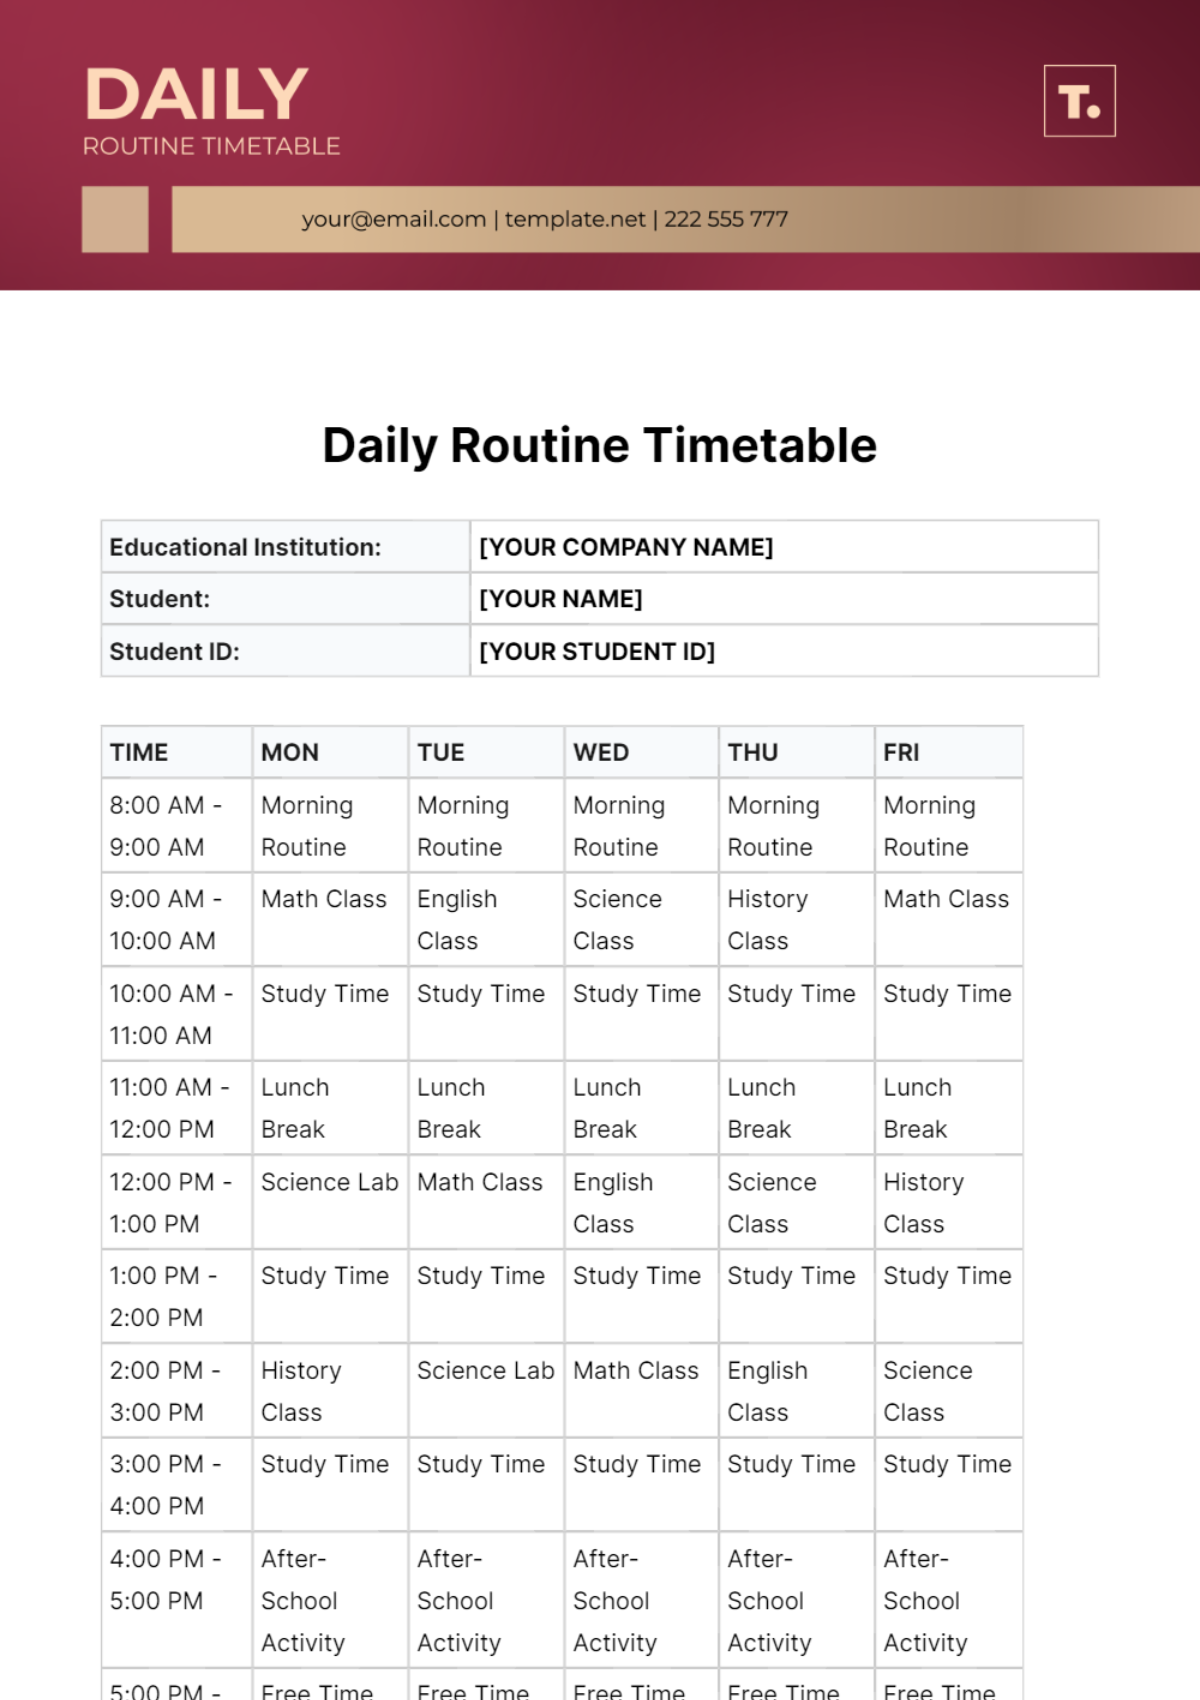 Daily Routine Timetable Template